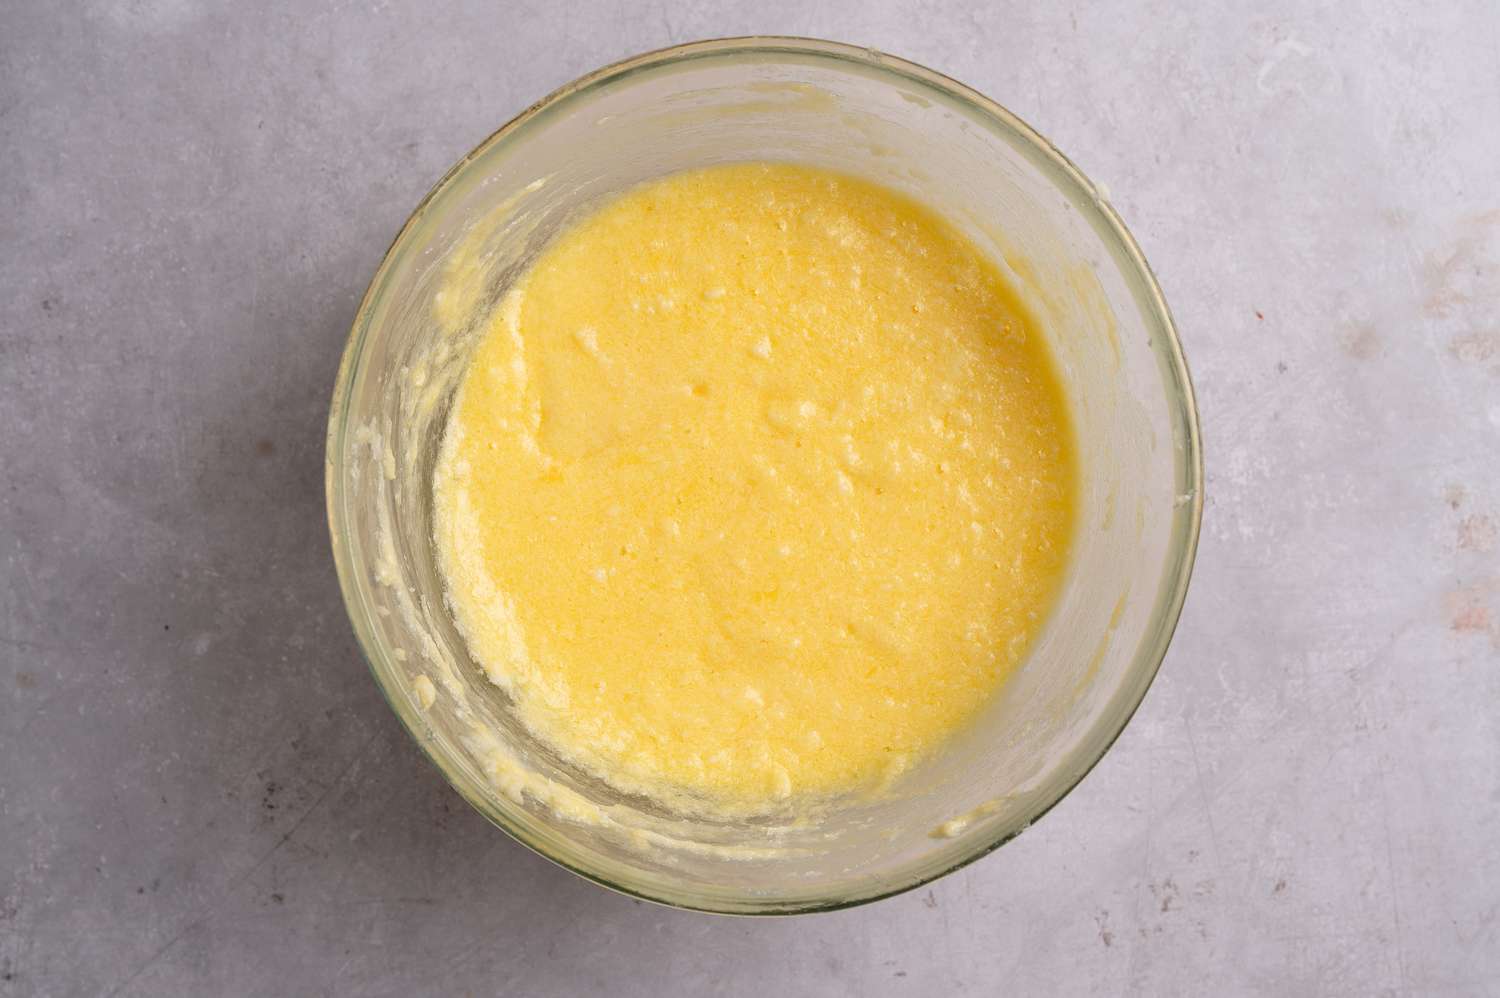 Eggs mixed into the butter mixture